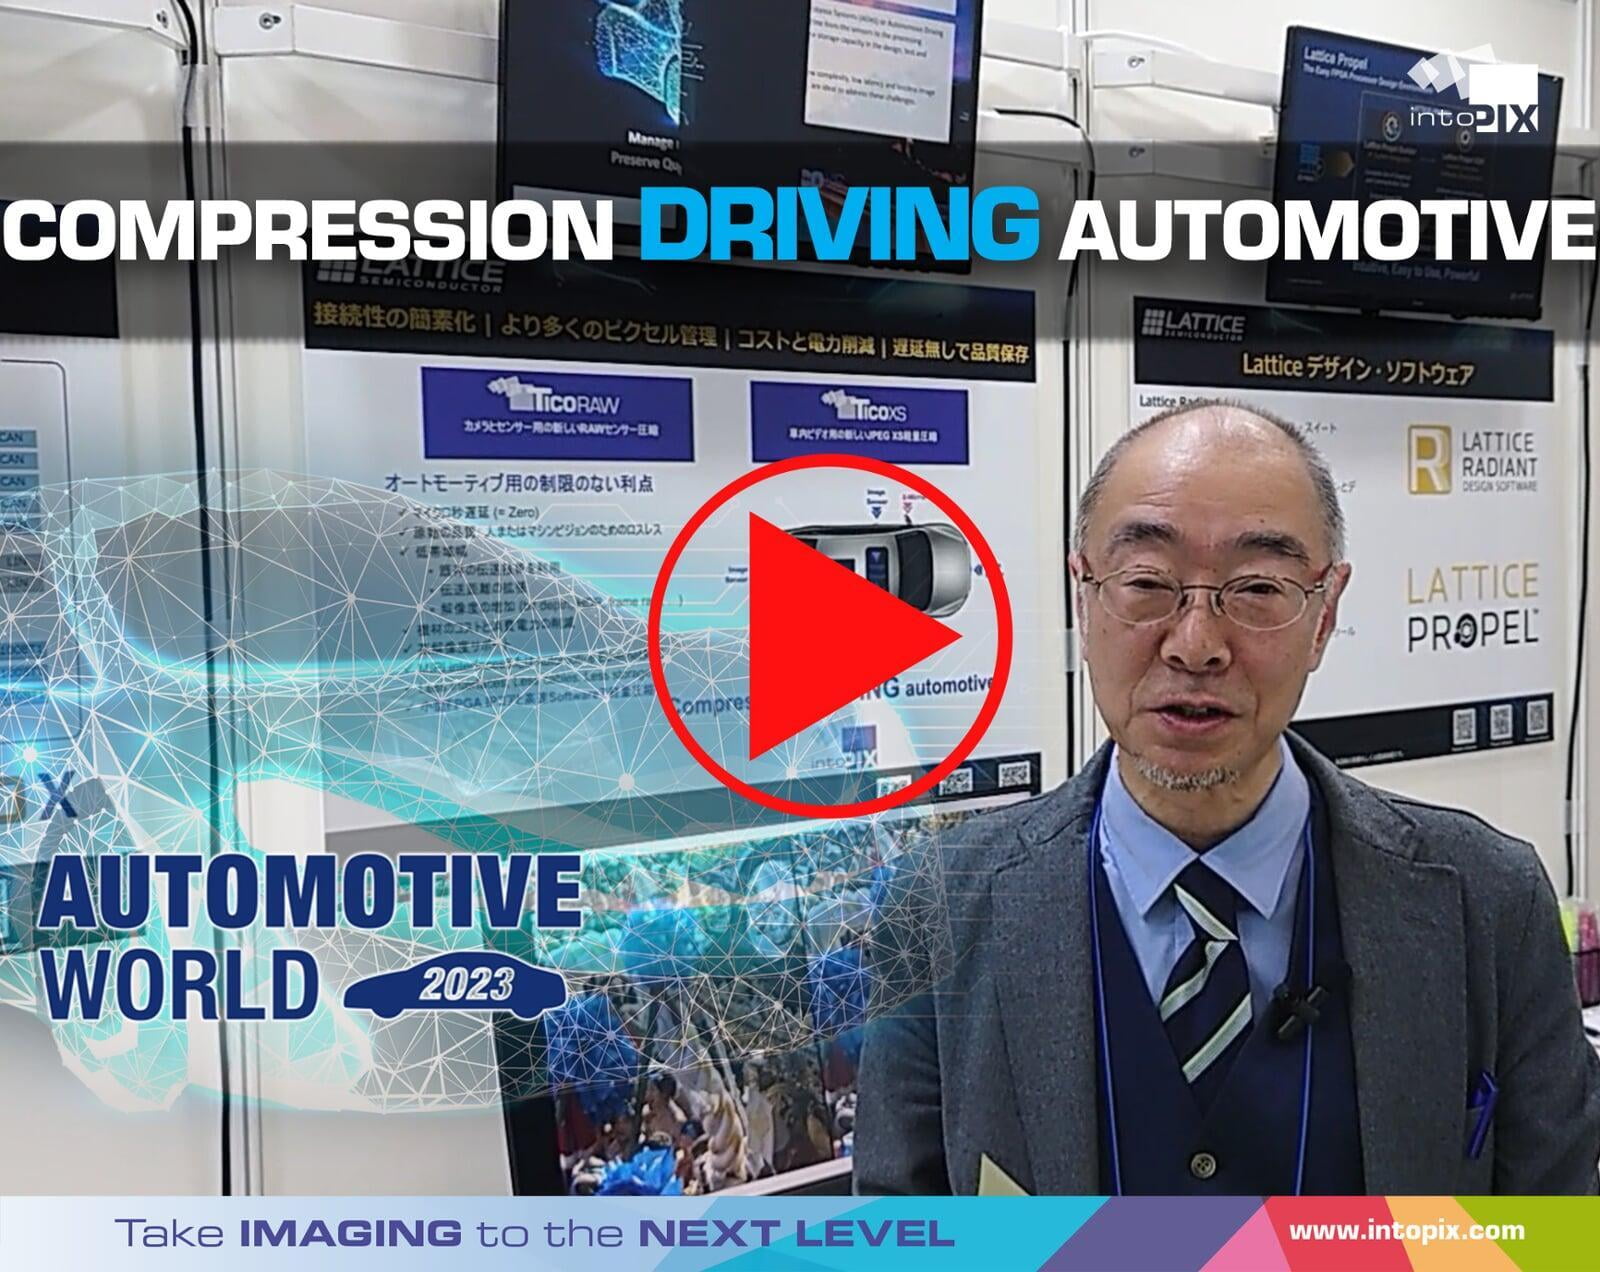 Japanese Video Demo from Automotive World 2023 : Compression DRIVING automotive